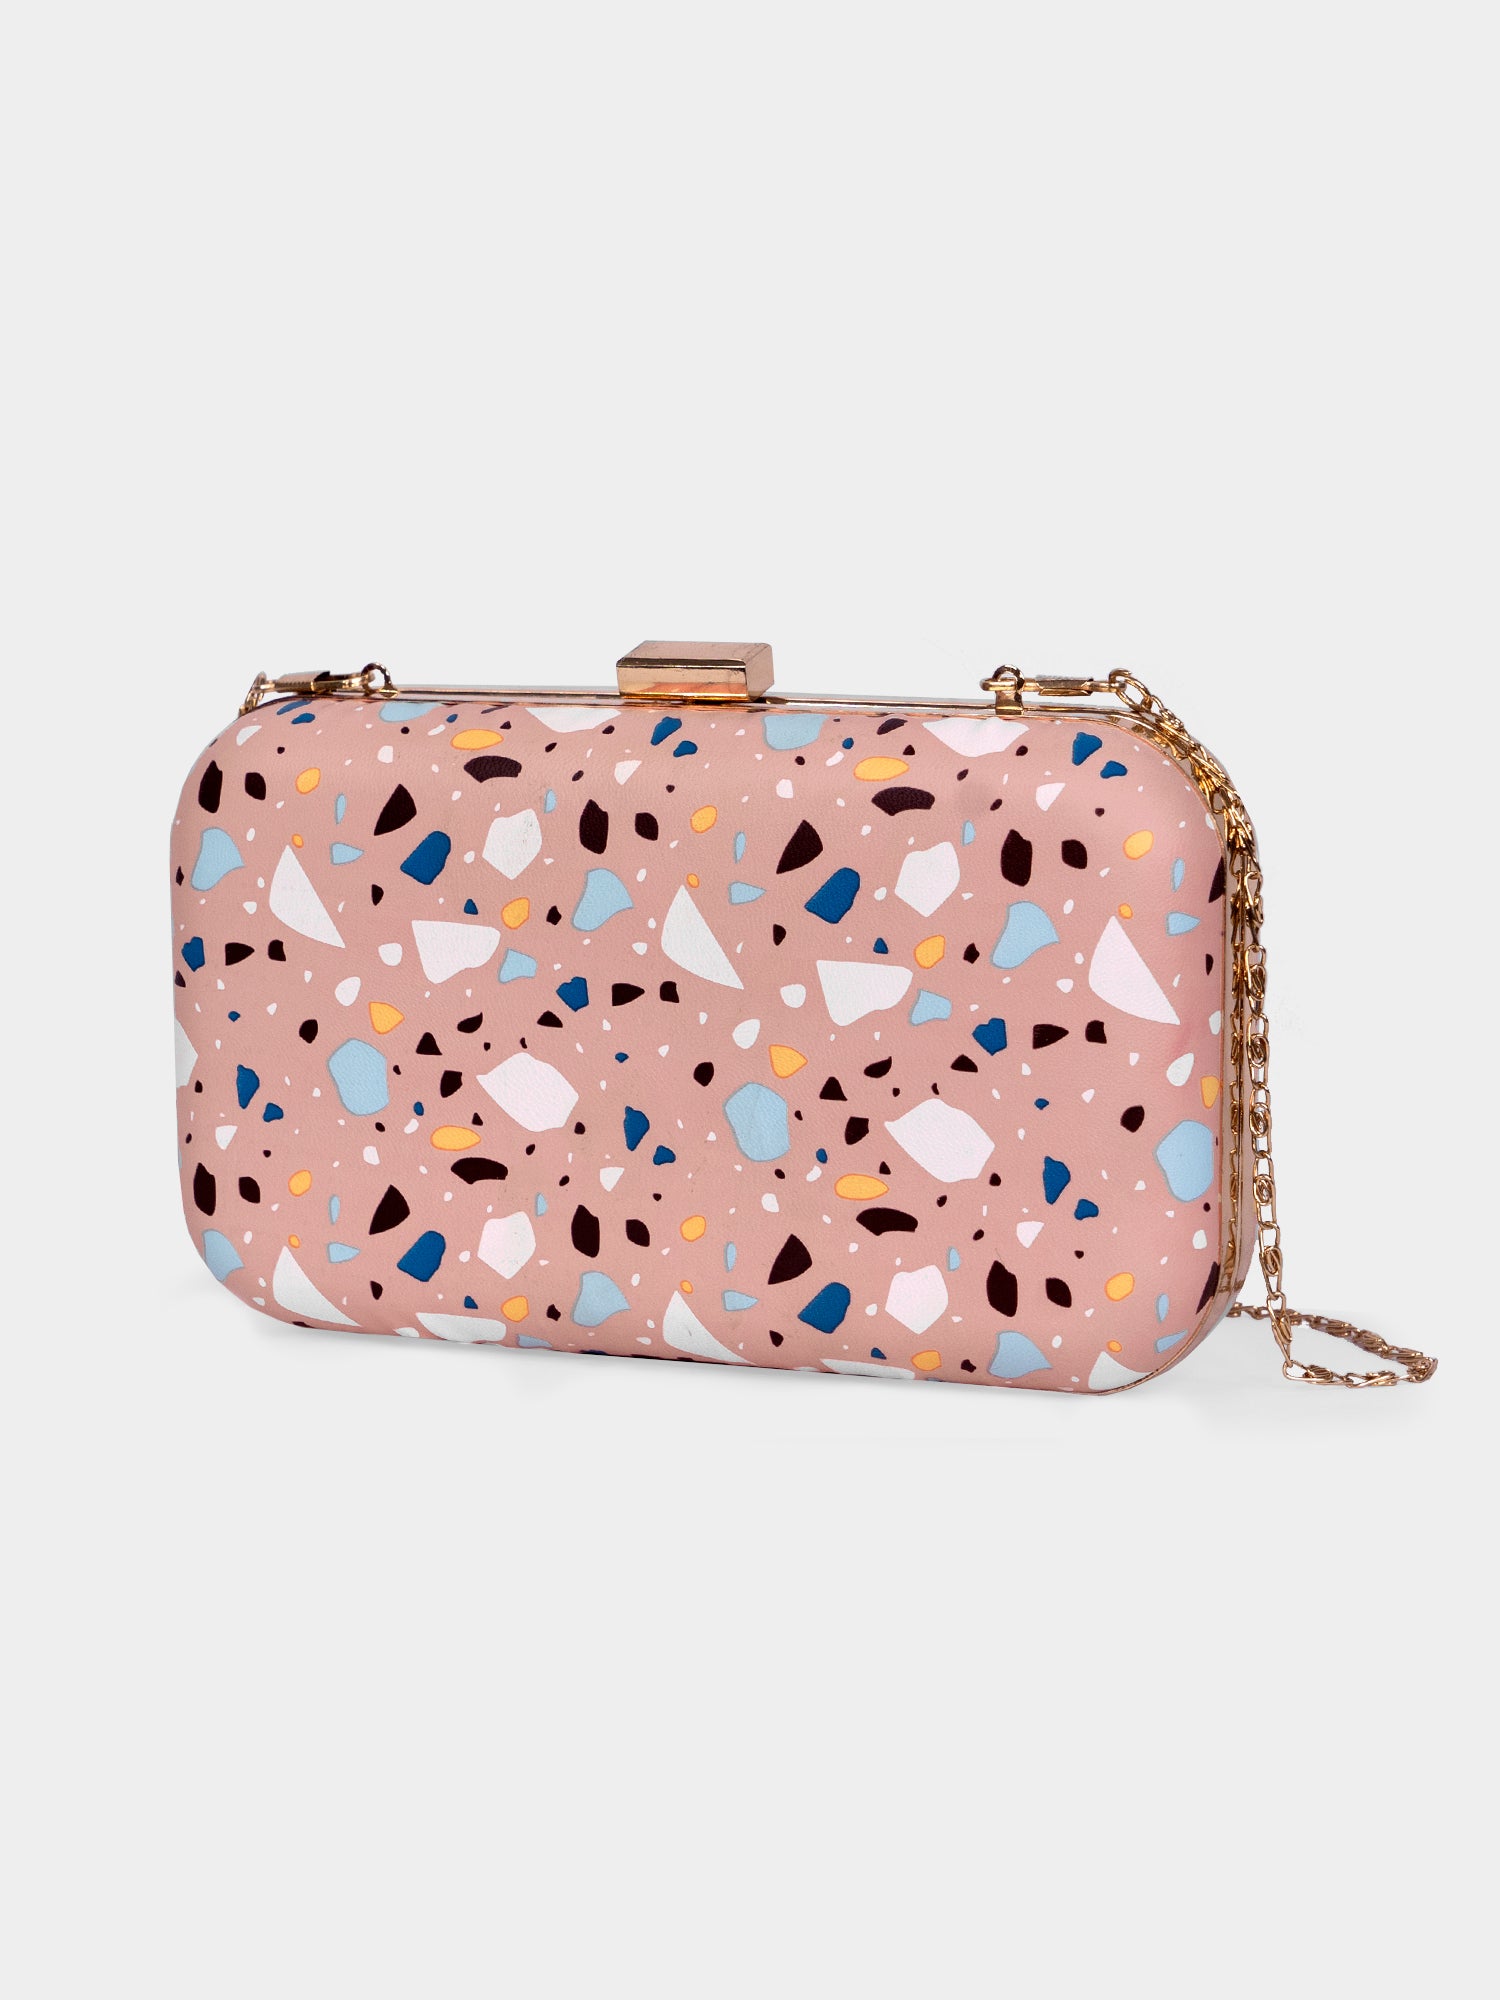 Buy Waverly Print Zipper Pouches With Strap/Clutch Bags/Mulit Makeup Bags/ Handbags/Small Purse/Cute Bag online